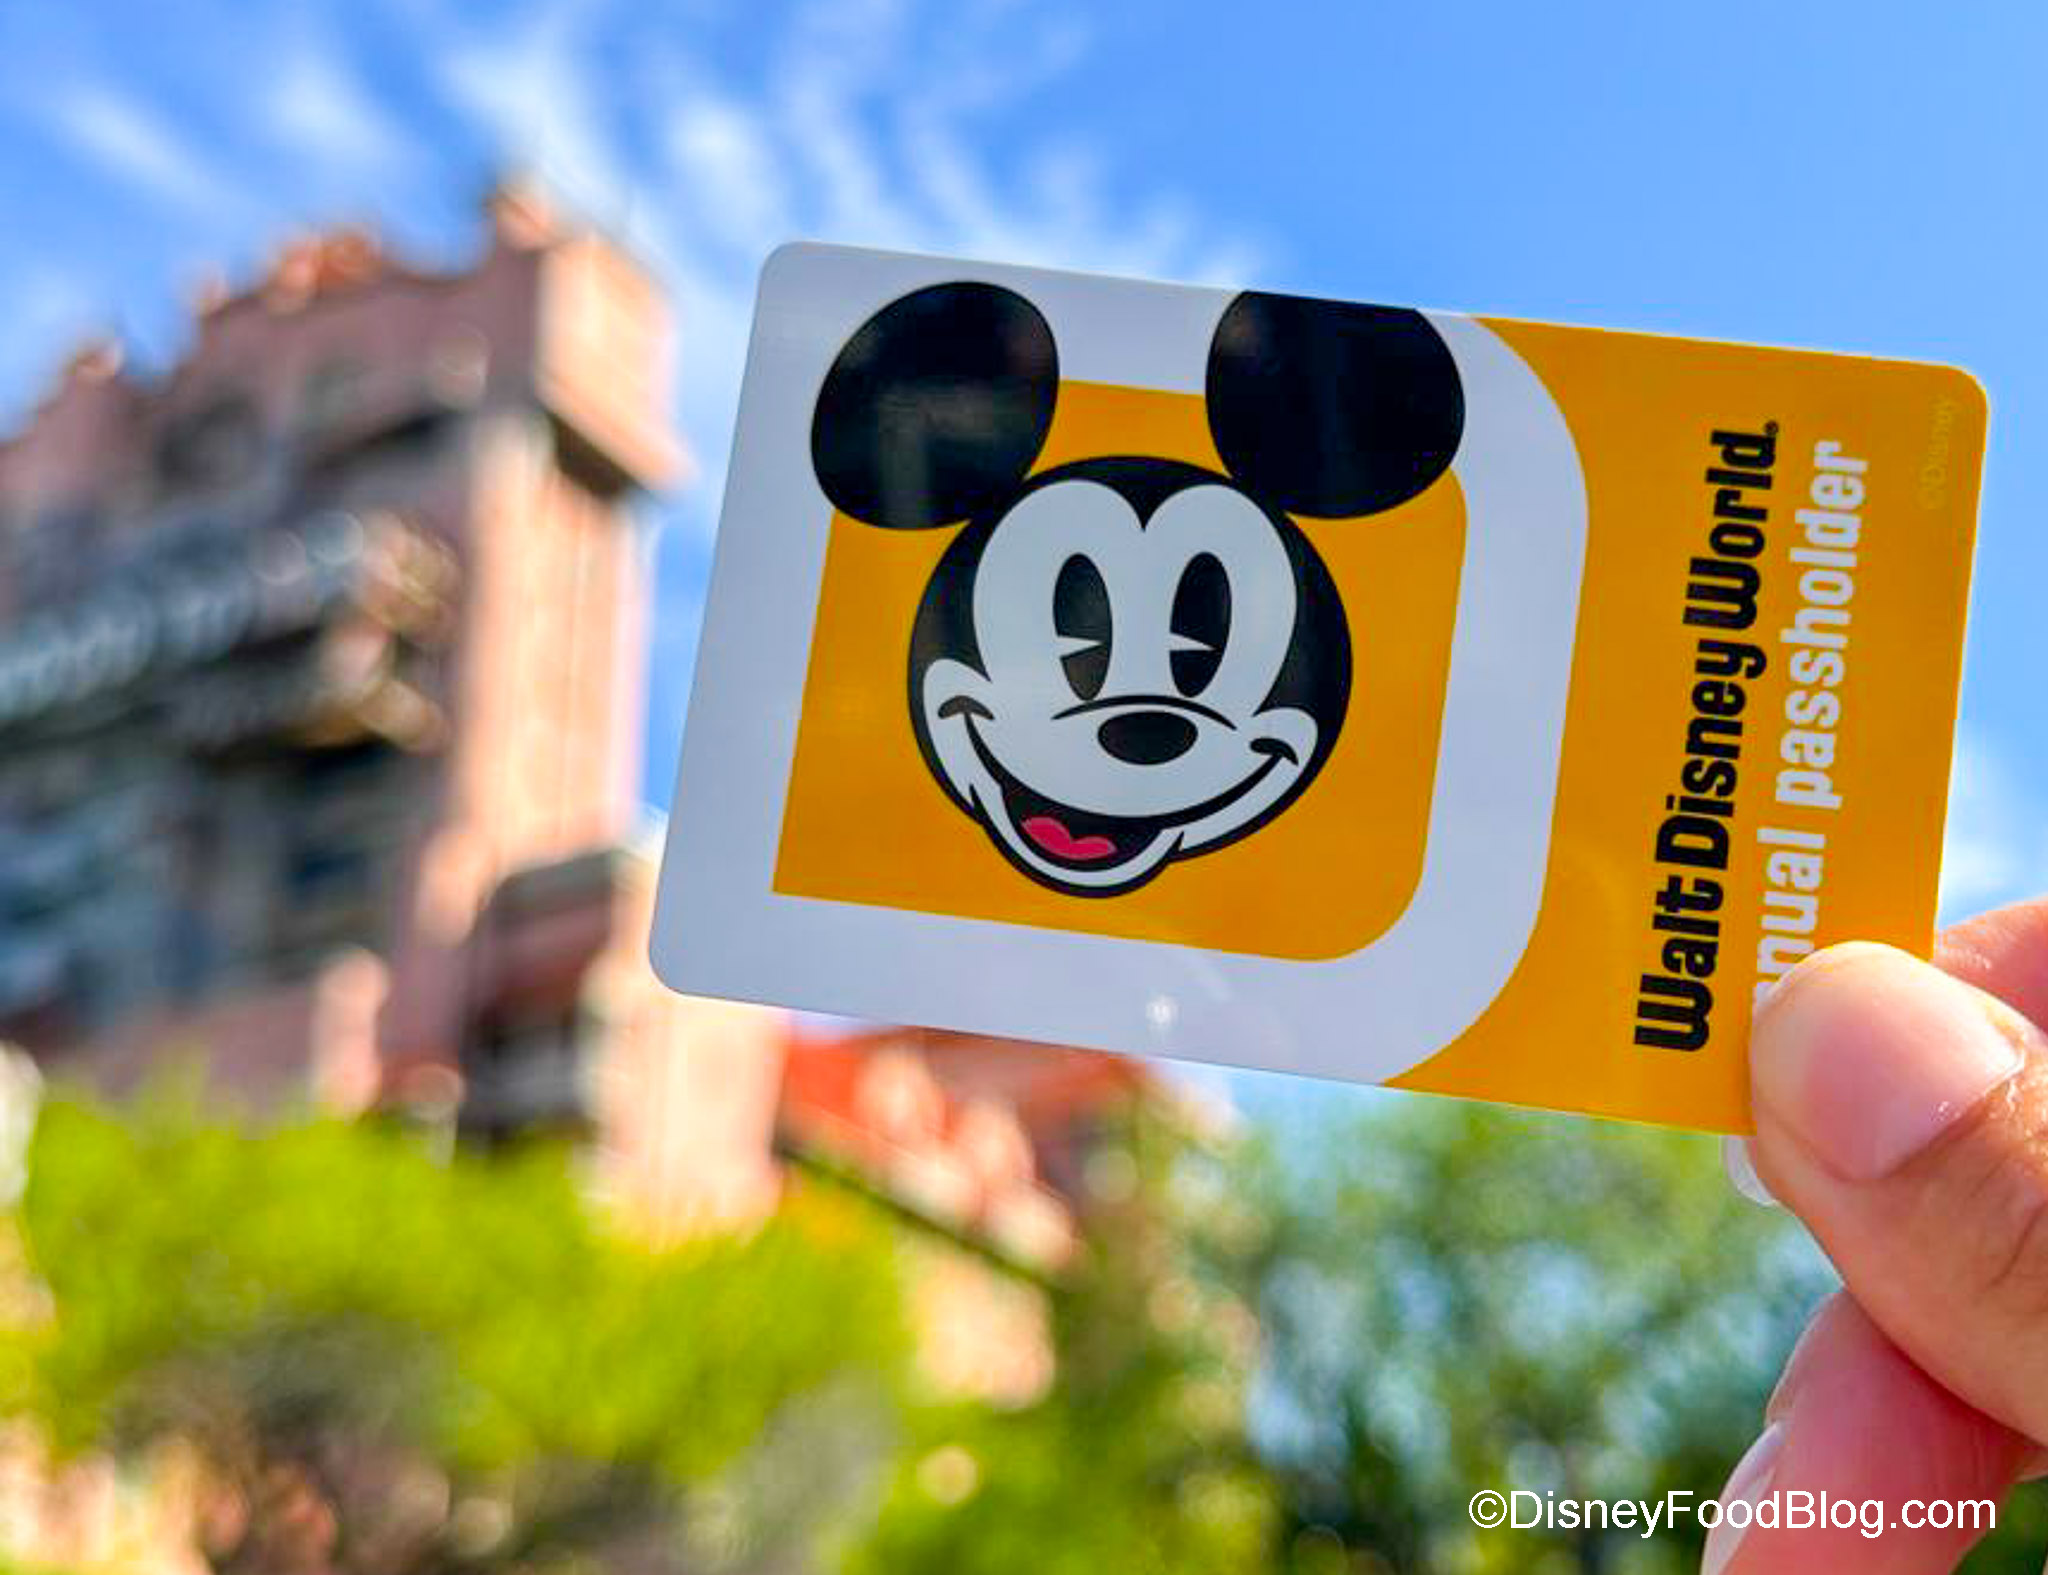 Alright, You Want to Buy a Disney World Annual Pass. We're